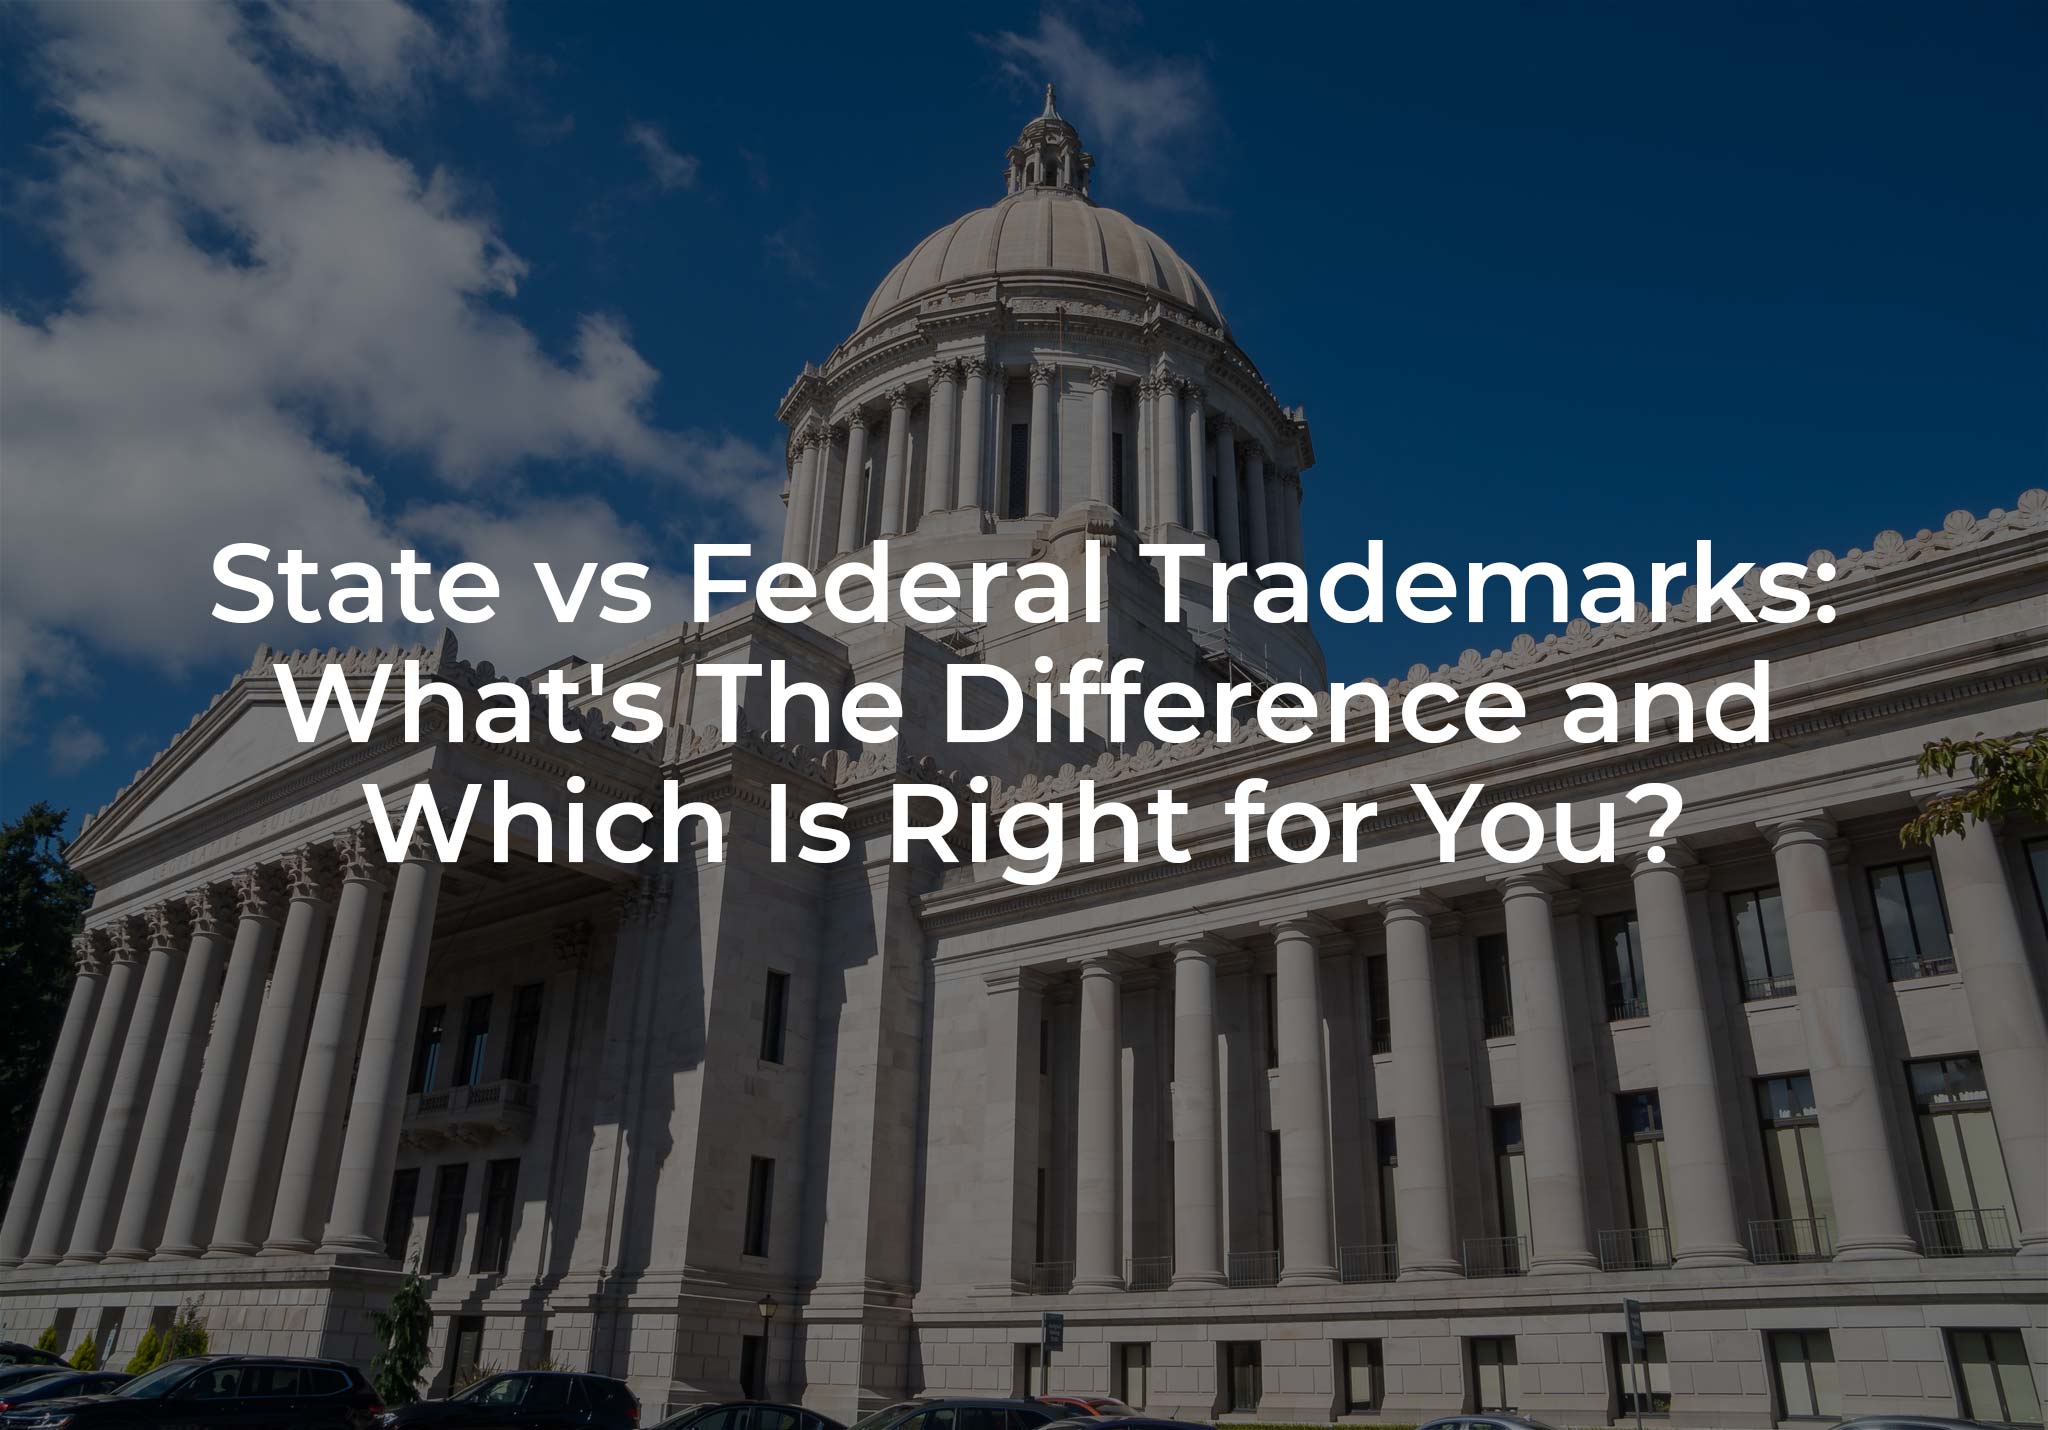 State vs Federal Trademarks: What's The Difference and Which Is Right for You?